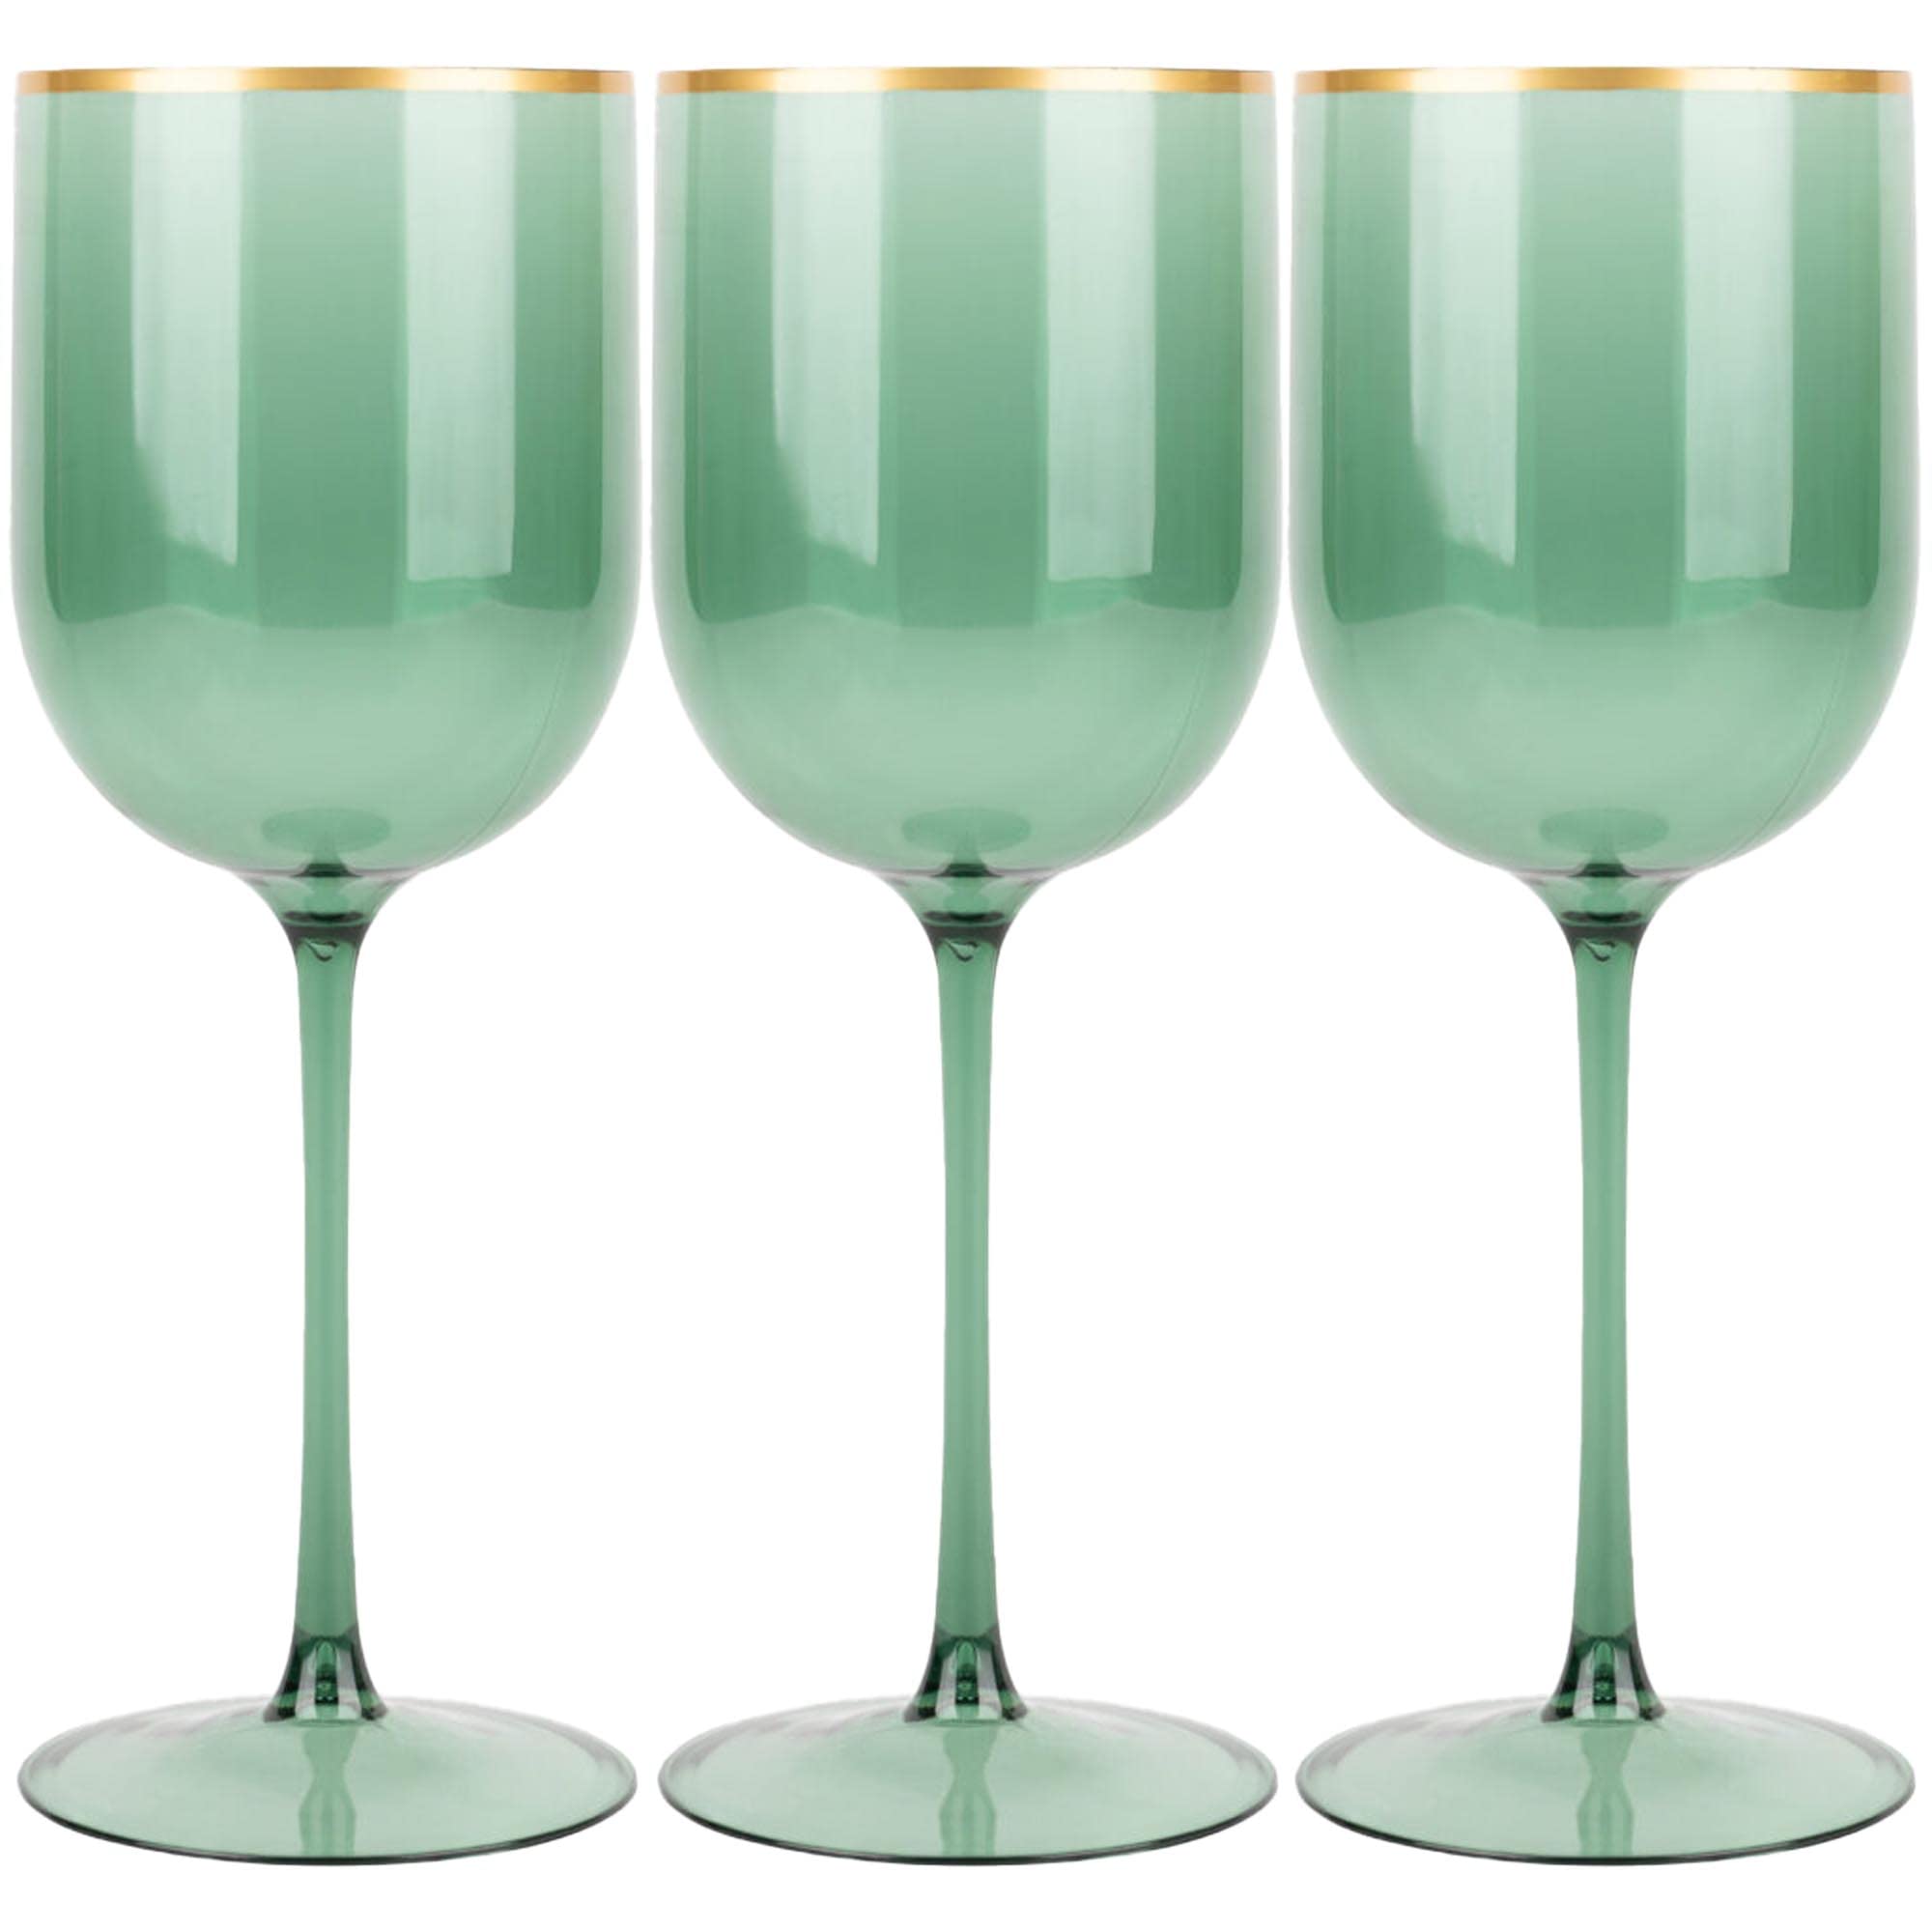 EcoQuality Translucent Plastic Green Wine Glasses with Gold Rim - 12 oz Wine Glass with Stem, Disposable Shatterproof Wine Goblets, Reusable, Elegant Drink Cup Tumblers Weddings, Party (10 PACK)